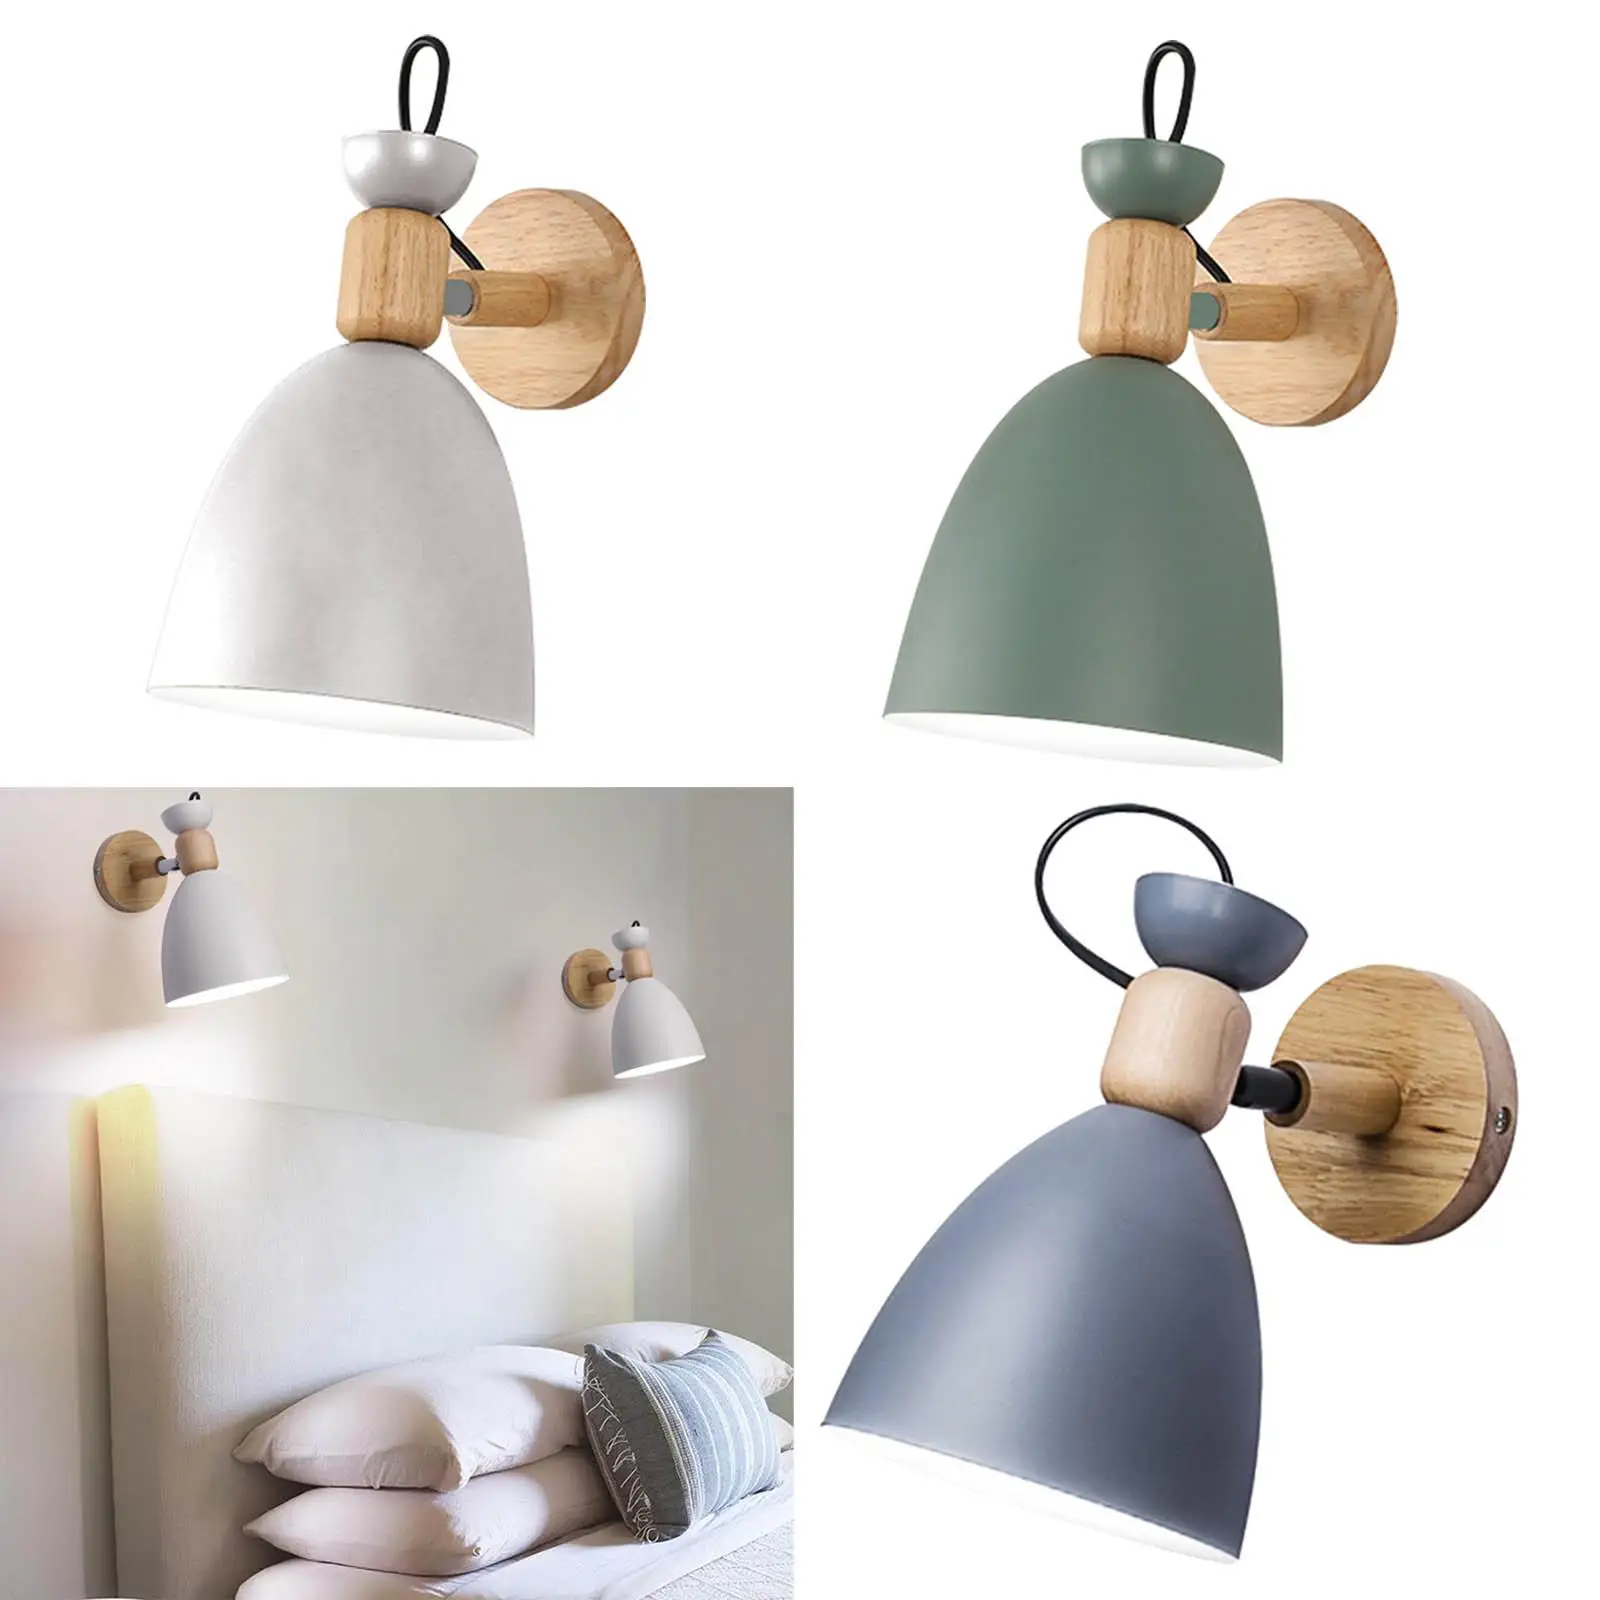 Farmhouse Wall Sconce Wall Mount Lamp Fixtures E27 Base Holder Metal Lamp Shade for Home Kitchen Dining Room Bathroom Indoor